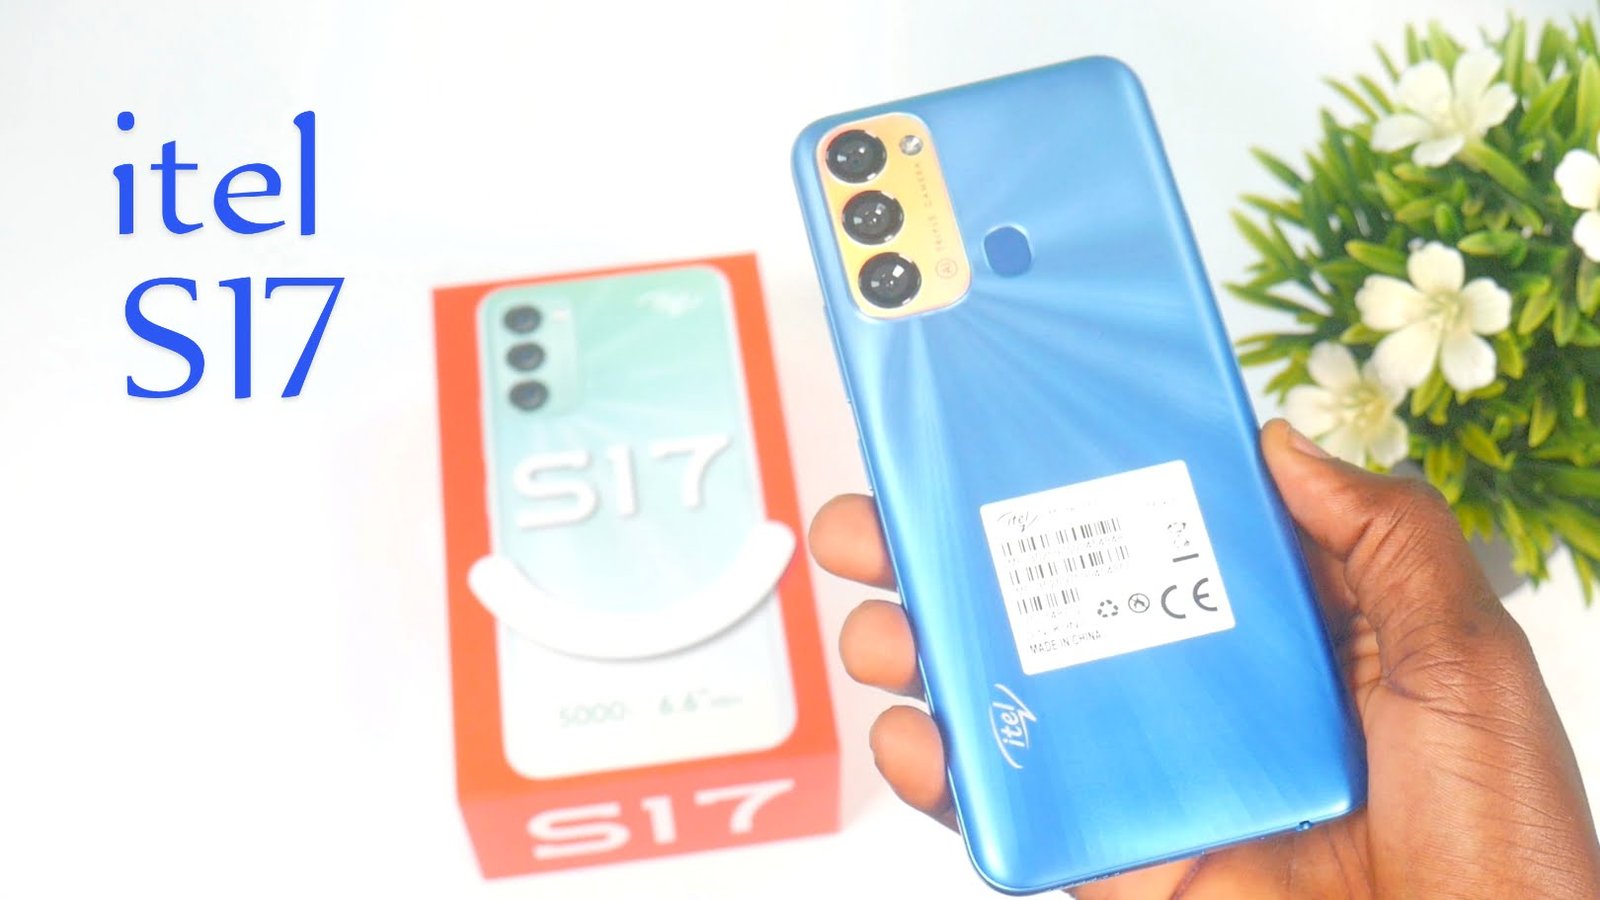 itel S17 Price in Nigeria and Availability